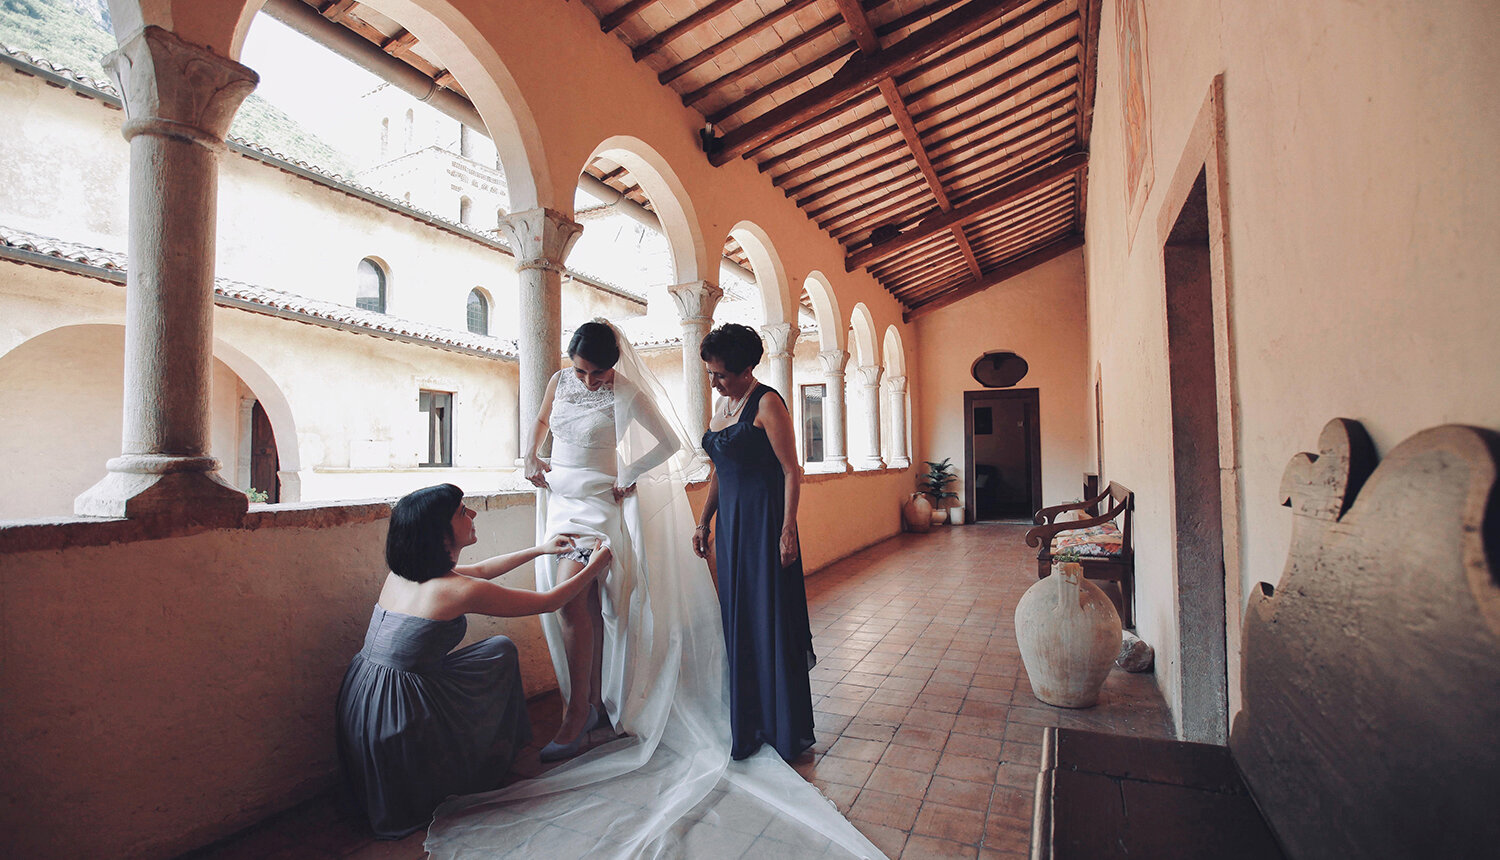 wedding photographer in malaysia specializing in destination wedding and engagement all around the world . kurtahs studio . italy tuscany church wedding photography at abbazia san pietro in valle . 0214.jpg